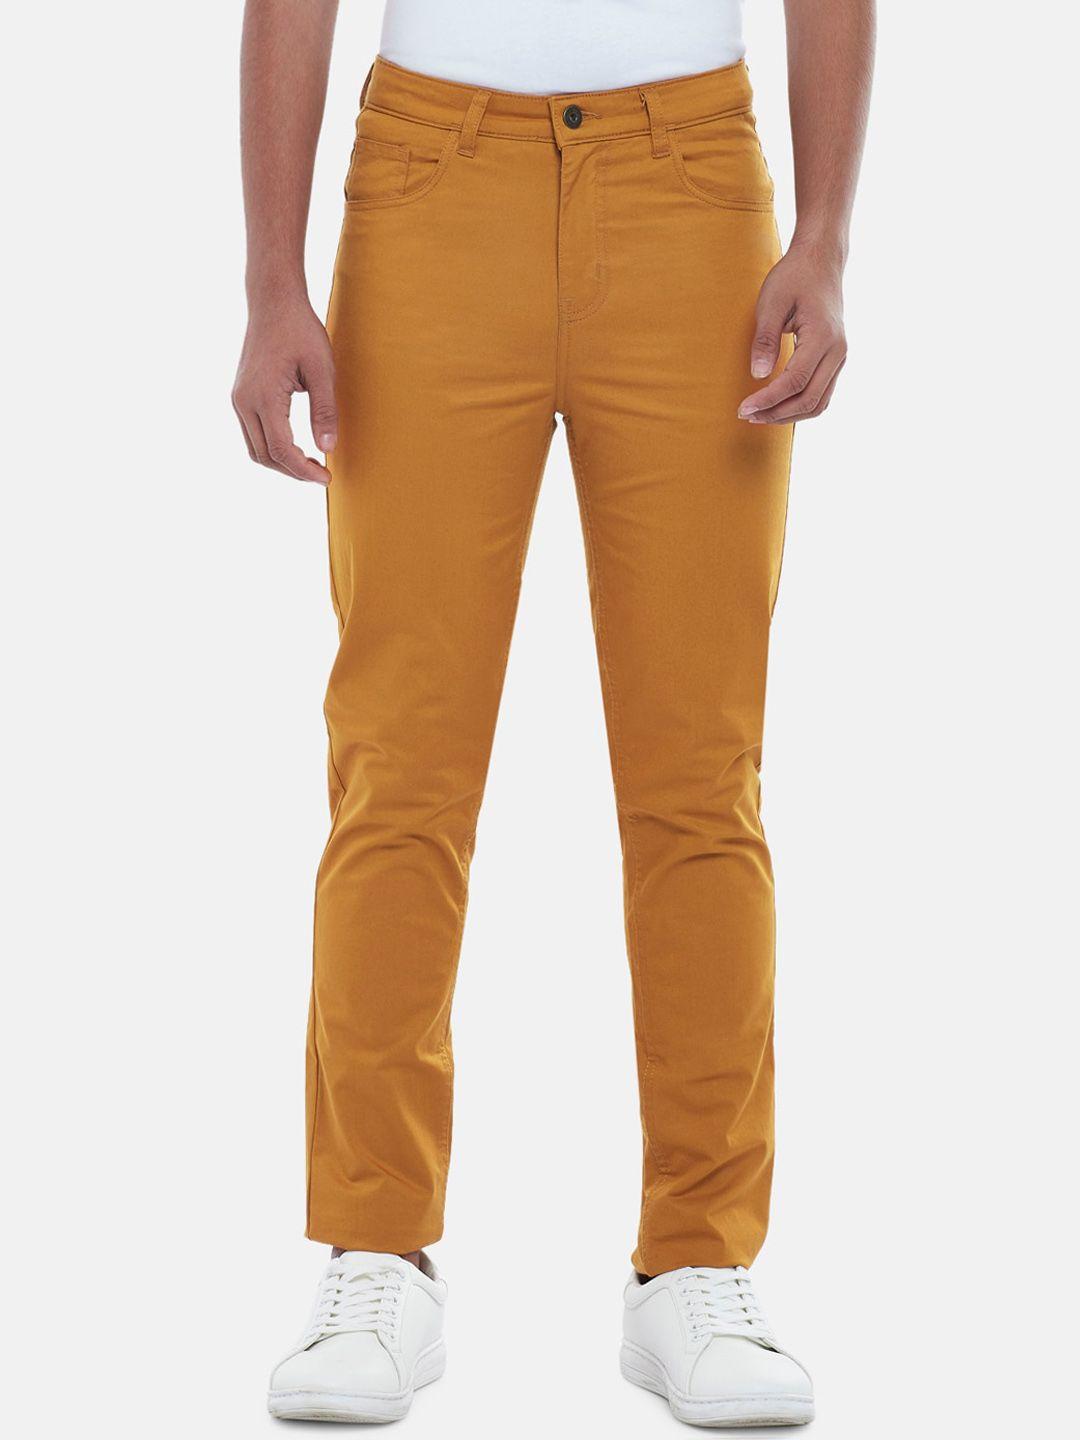 coolsters-by-pantaloons-boys-mustard-yellow-solid-cotton-trousers